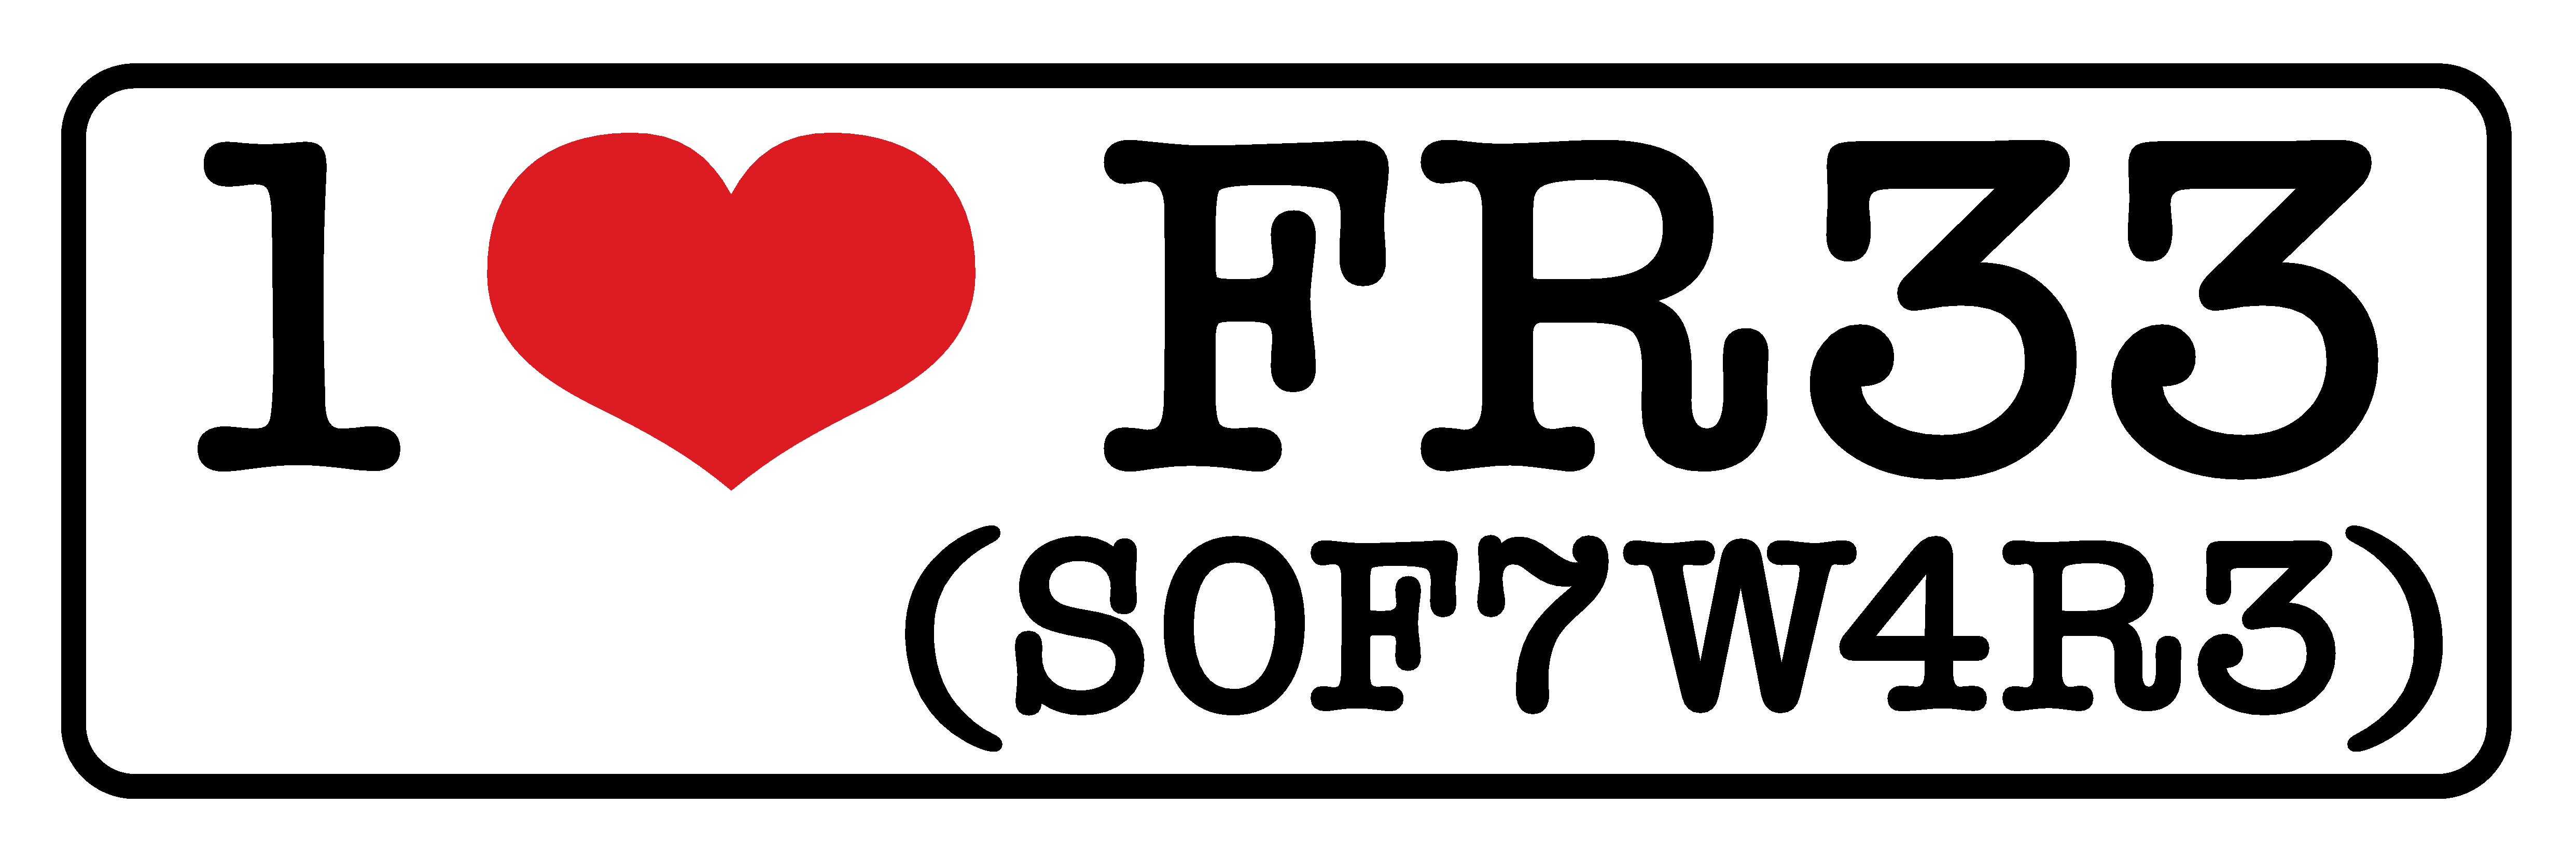 free software directory